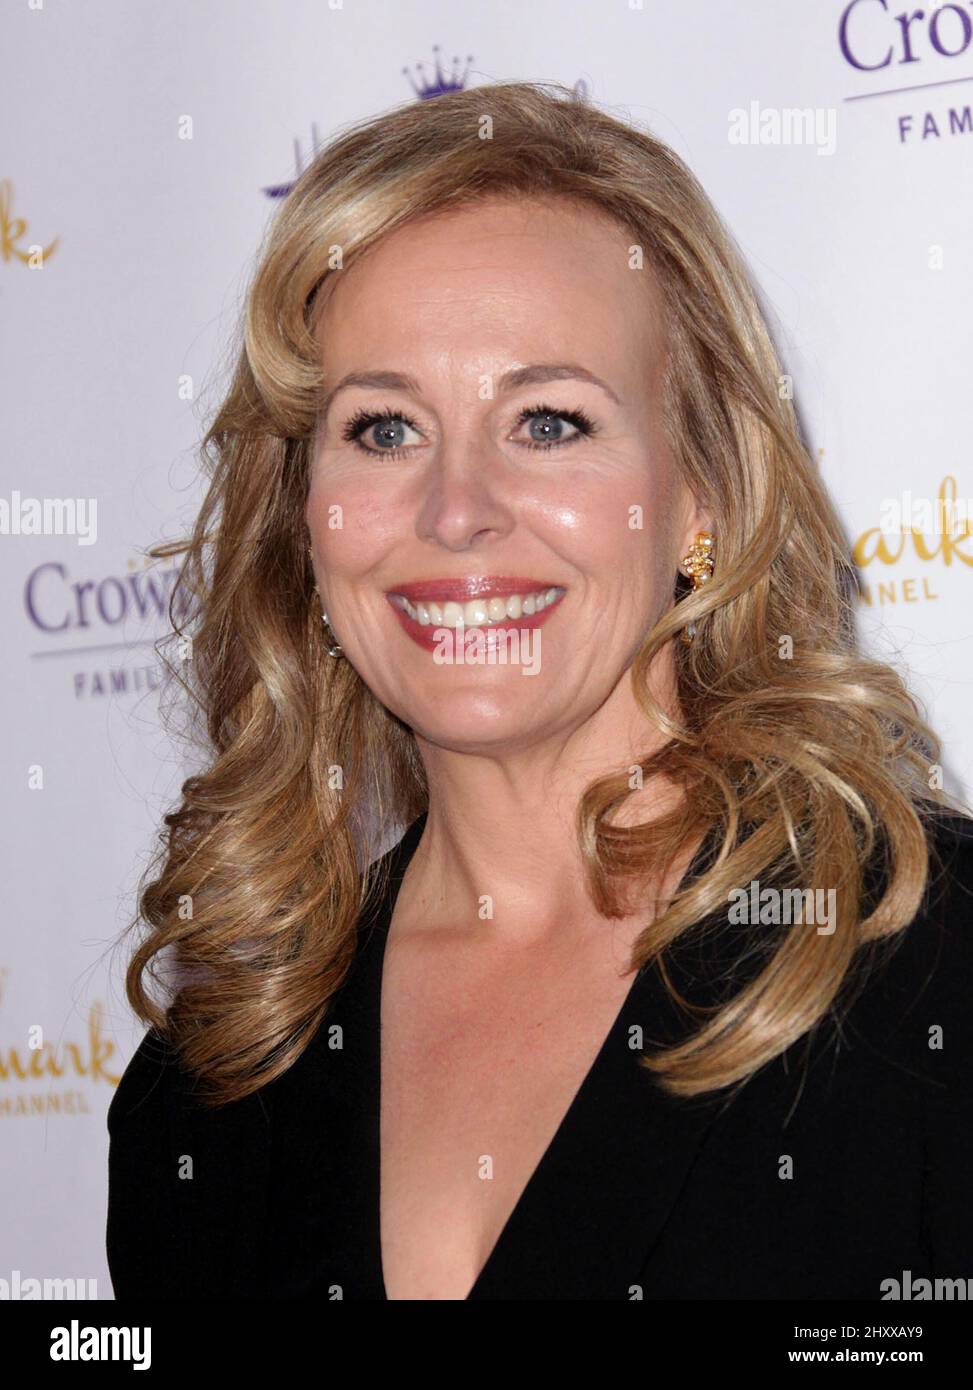 Genie Francis during the Hallmark Evening Gala during the 2012 TCA Winter Press Tour held at the Tournament House, California Stock Photo